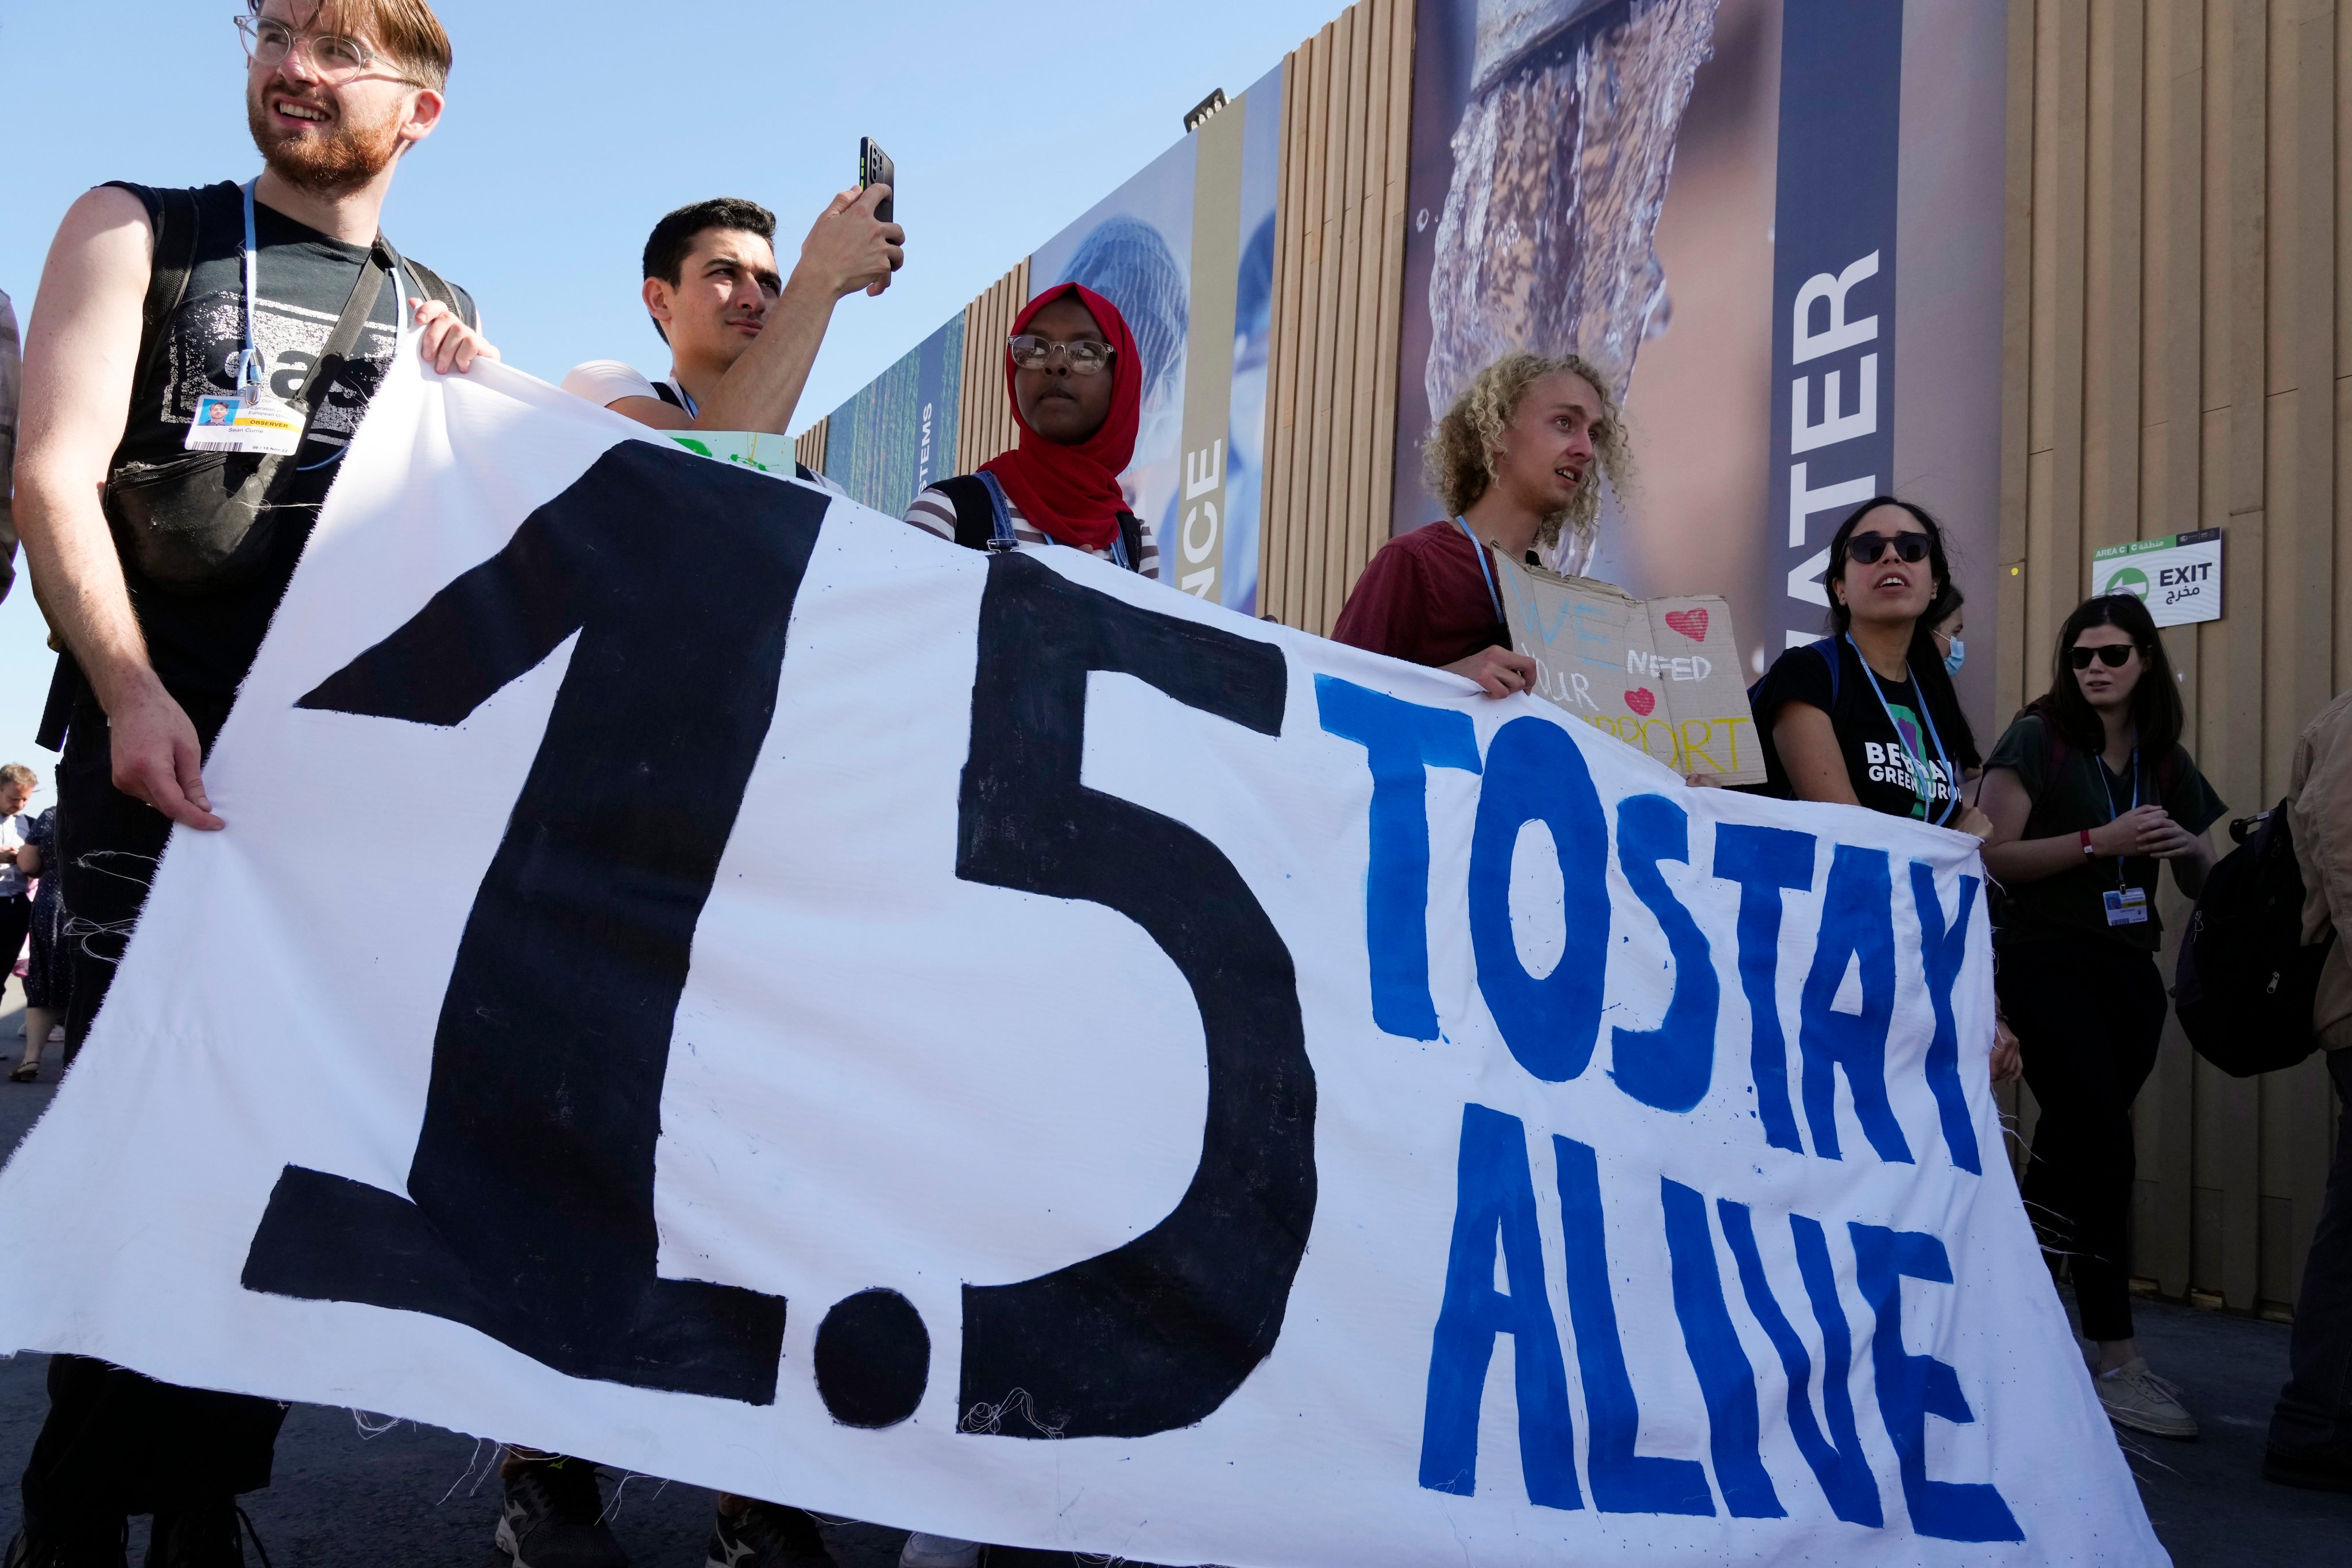 Demonstrators hold a sign during a protest that reads “1.5 to stay alive” at the COP27 UN climate summit on November 12 in Sharm el-Sheikh, Egypt. Photo: AP